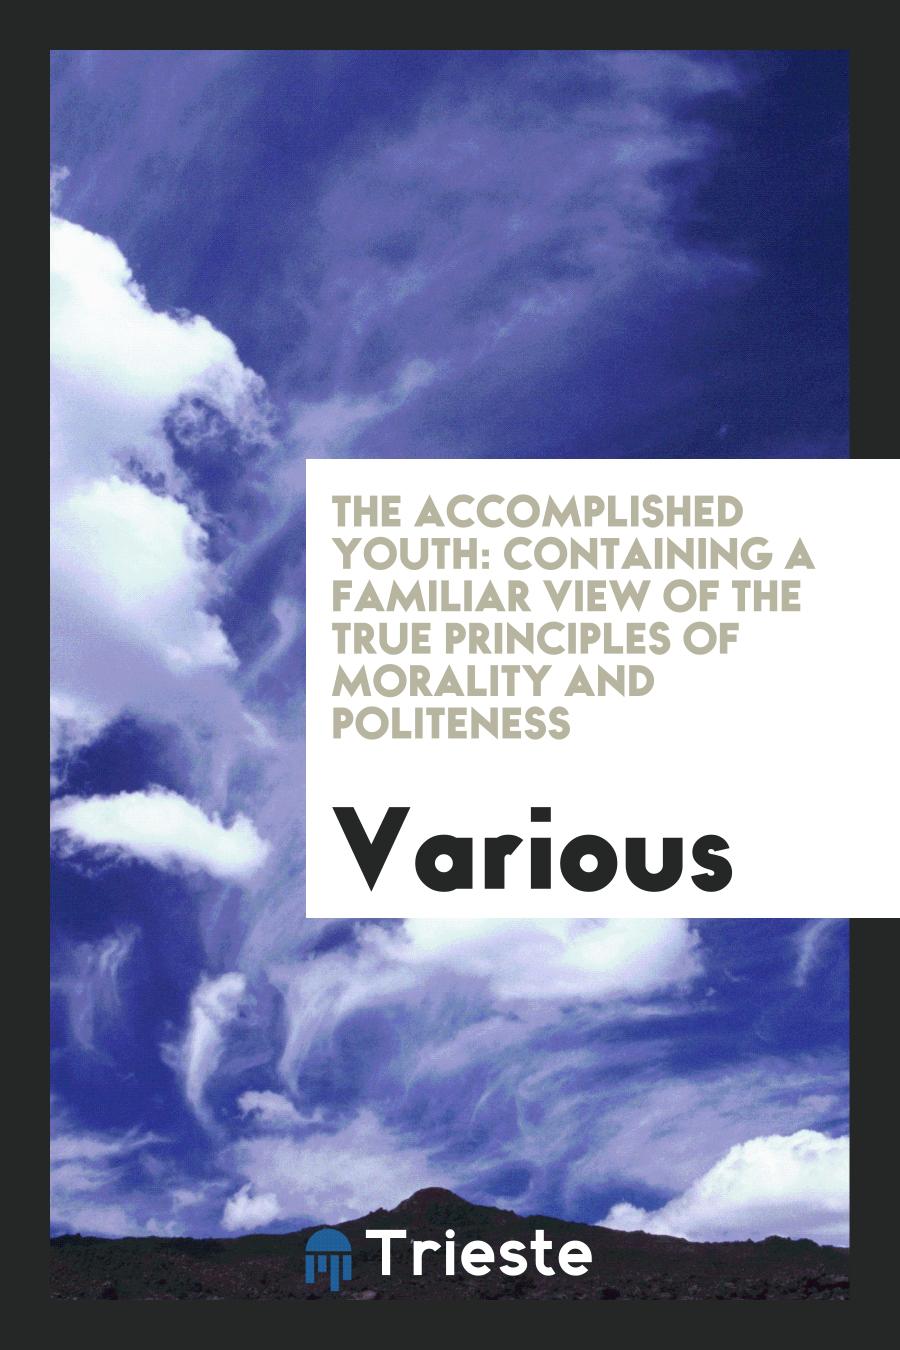 The accomplished youth: containing a familiar view of the true principles of morality and politeness